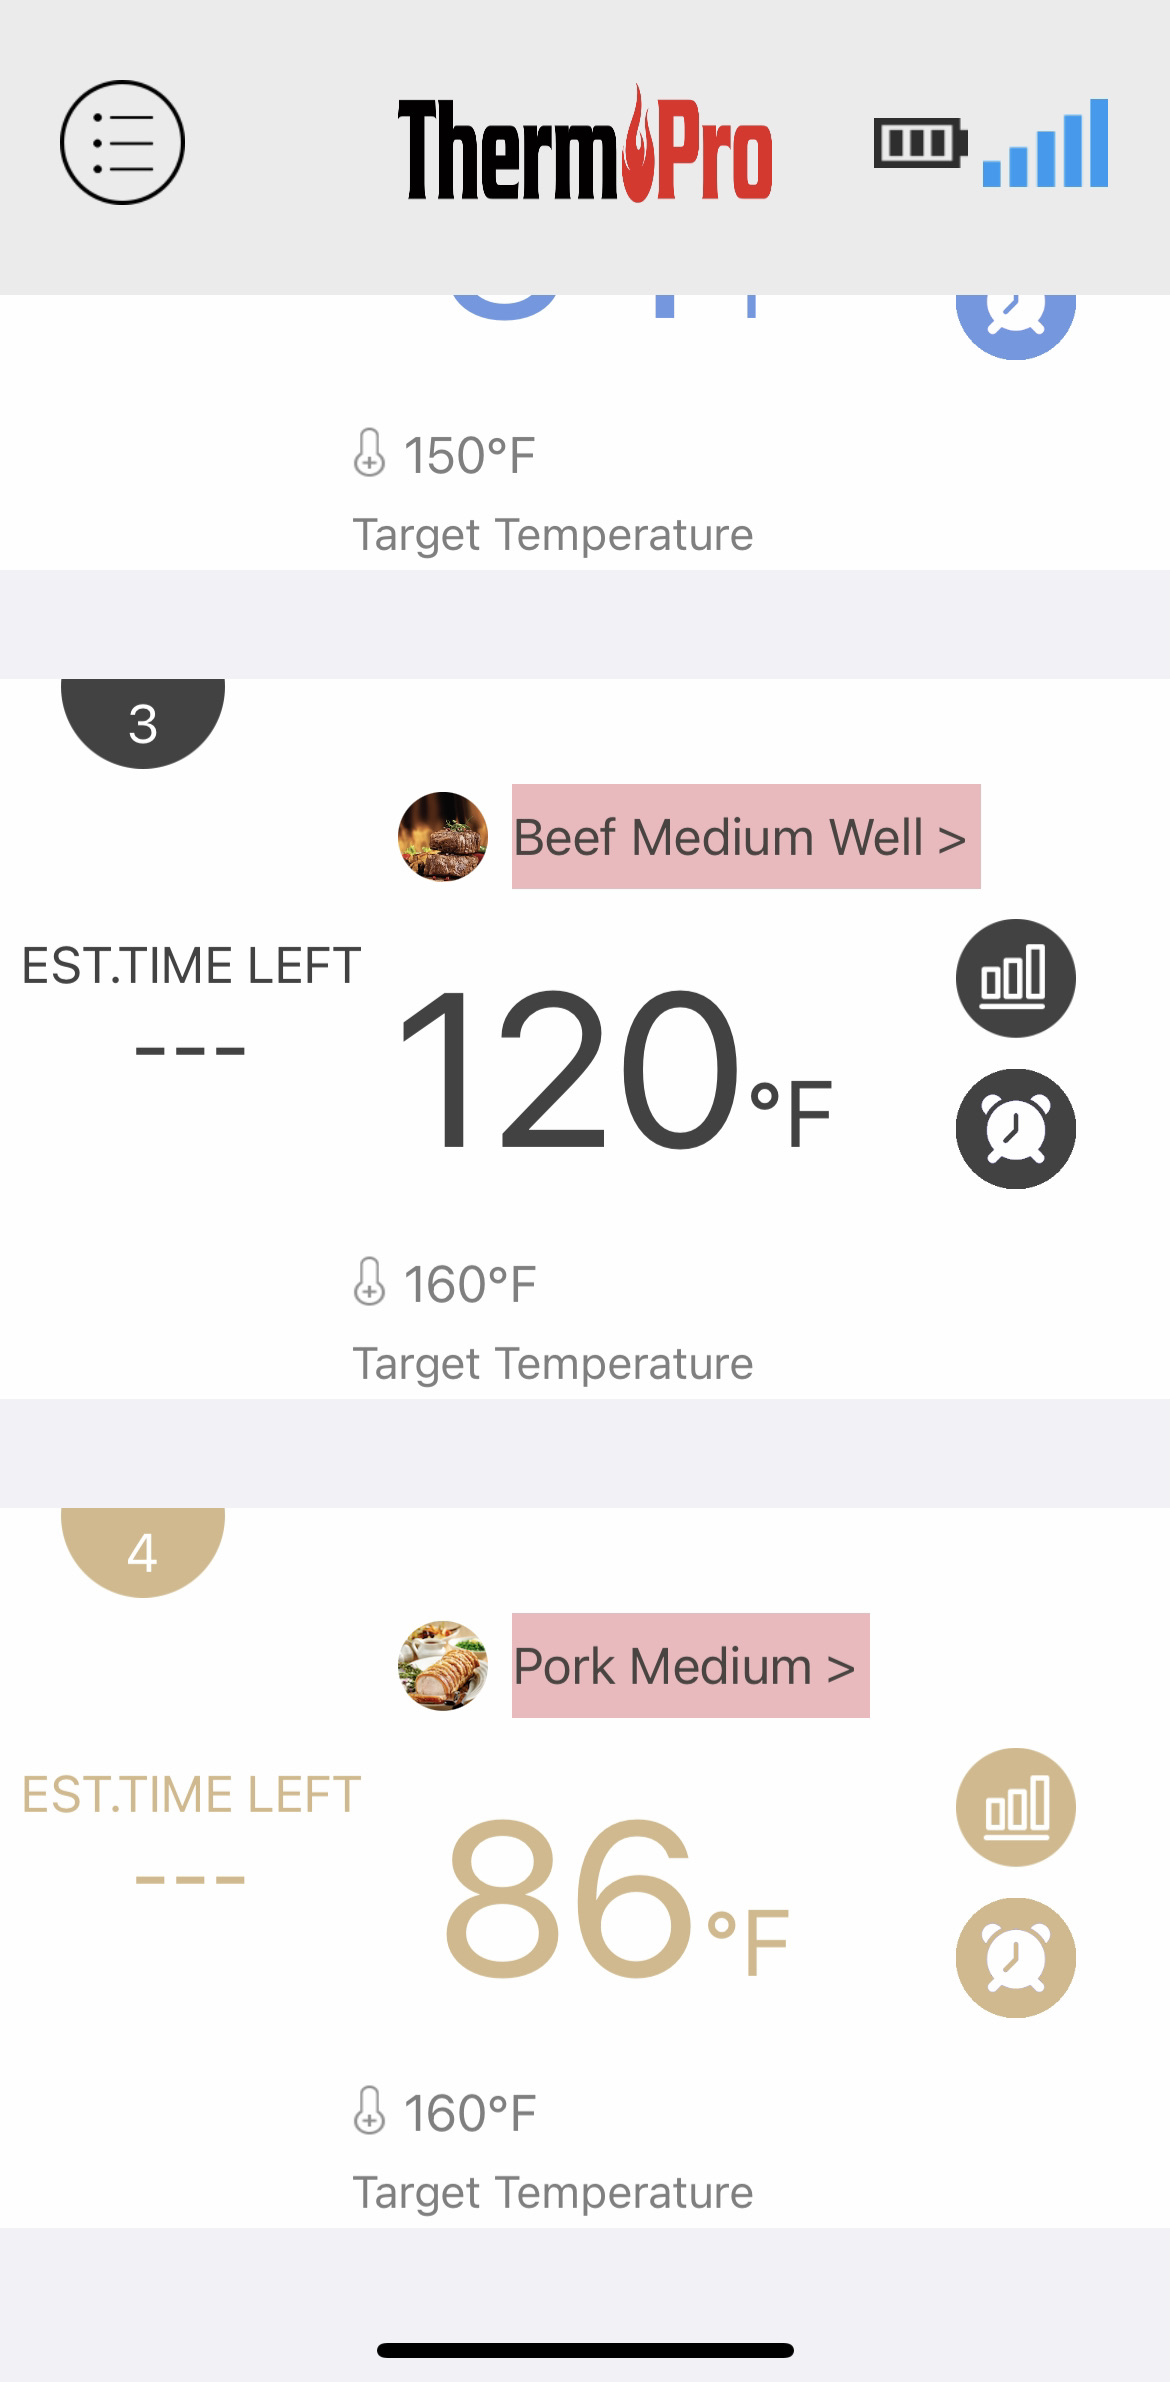 https://www.digitaltrends.com/wp-content/uploads/2022/08/ThermoPro-BBQ-meat-settings.jpeg?fit=720%2C720&p=1